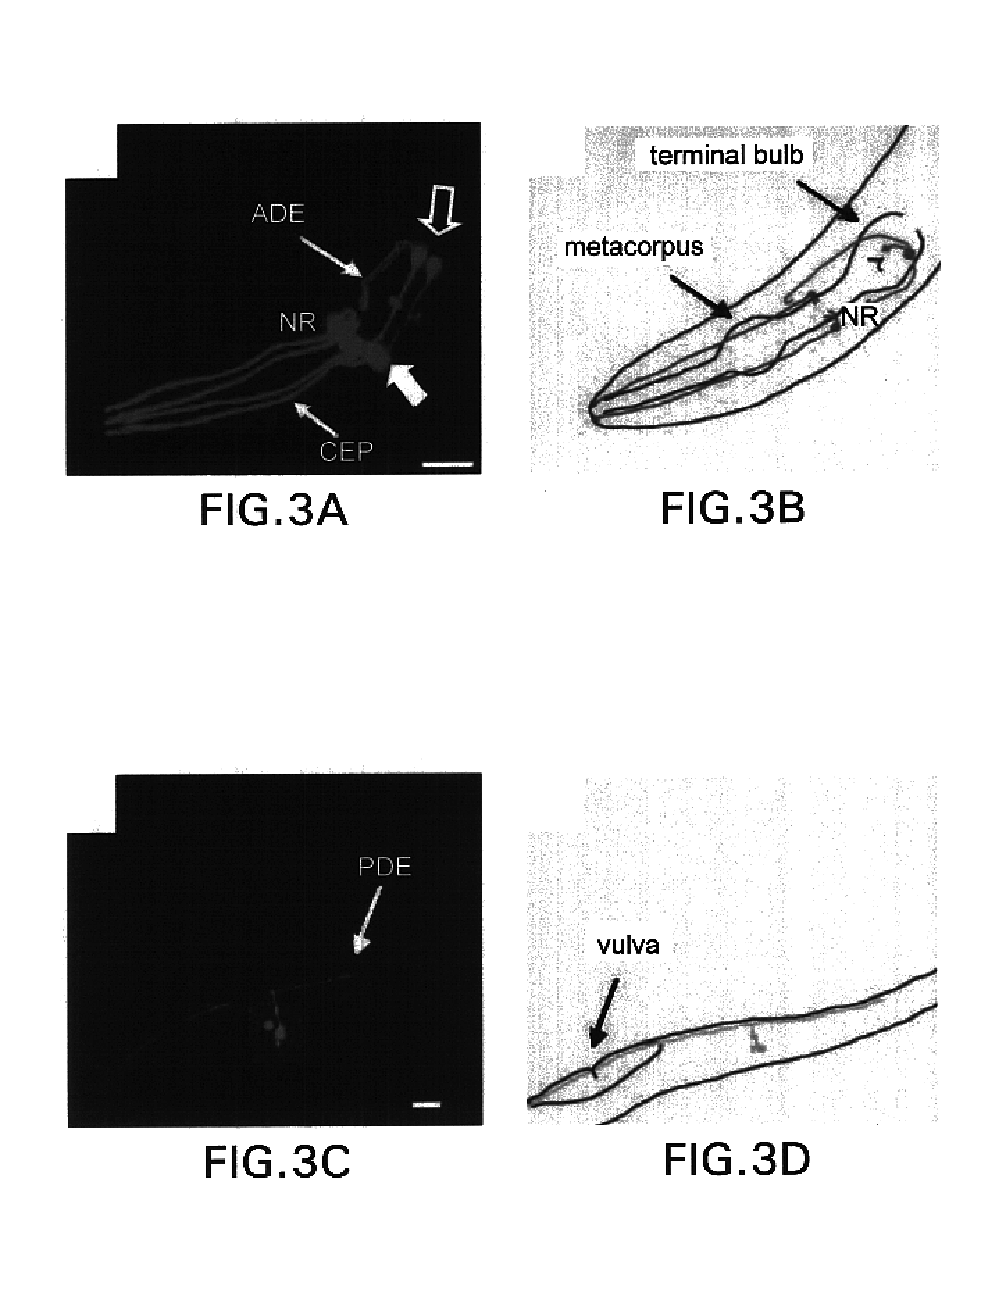 Assay for toxin induced neuronal degeneration and viability in C. elegans